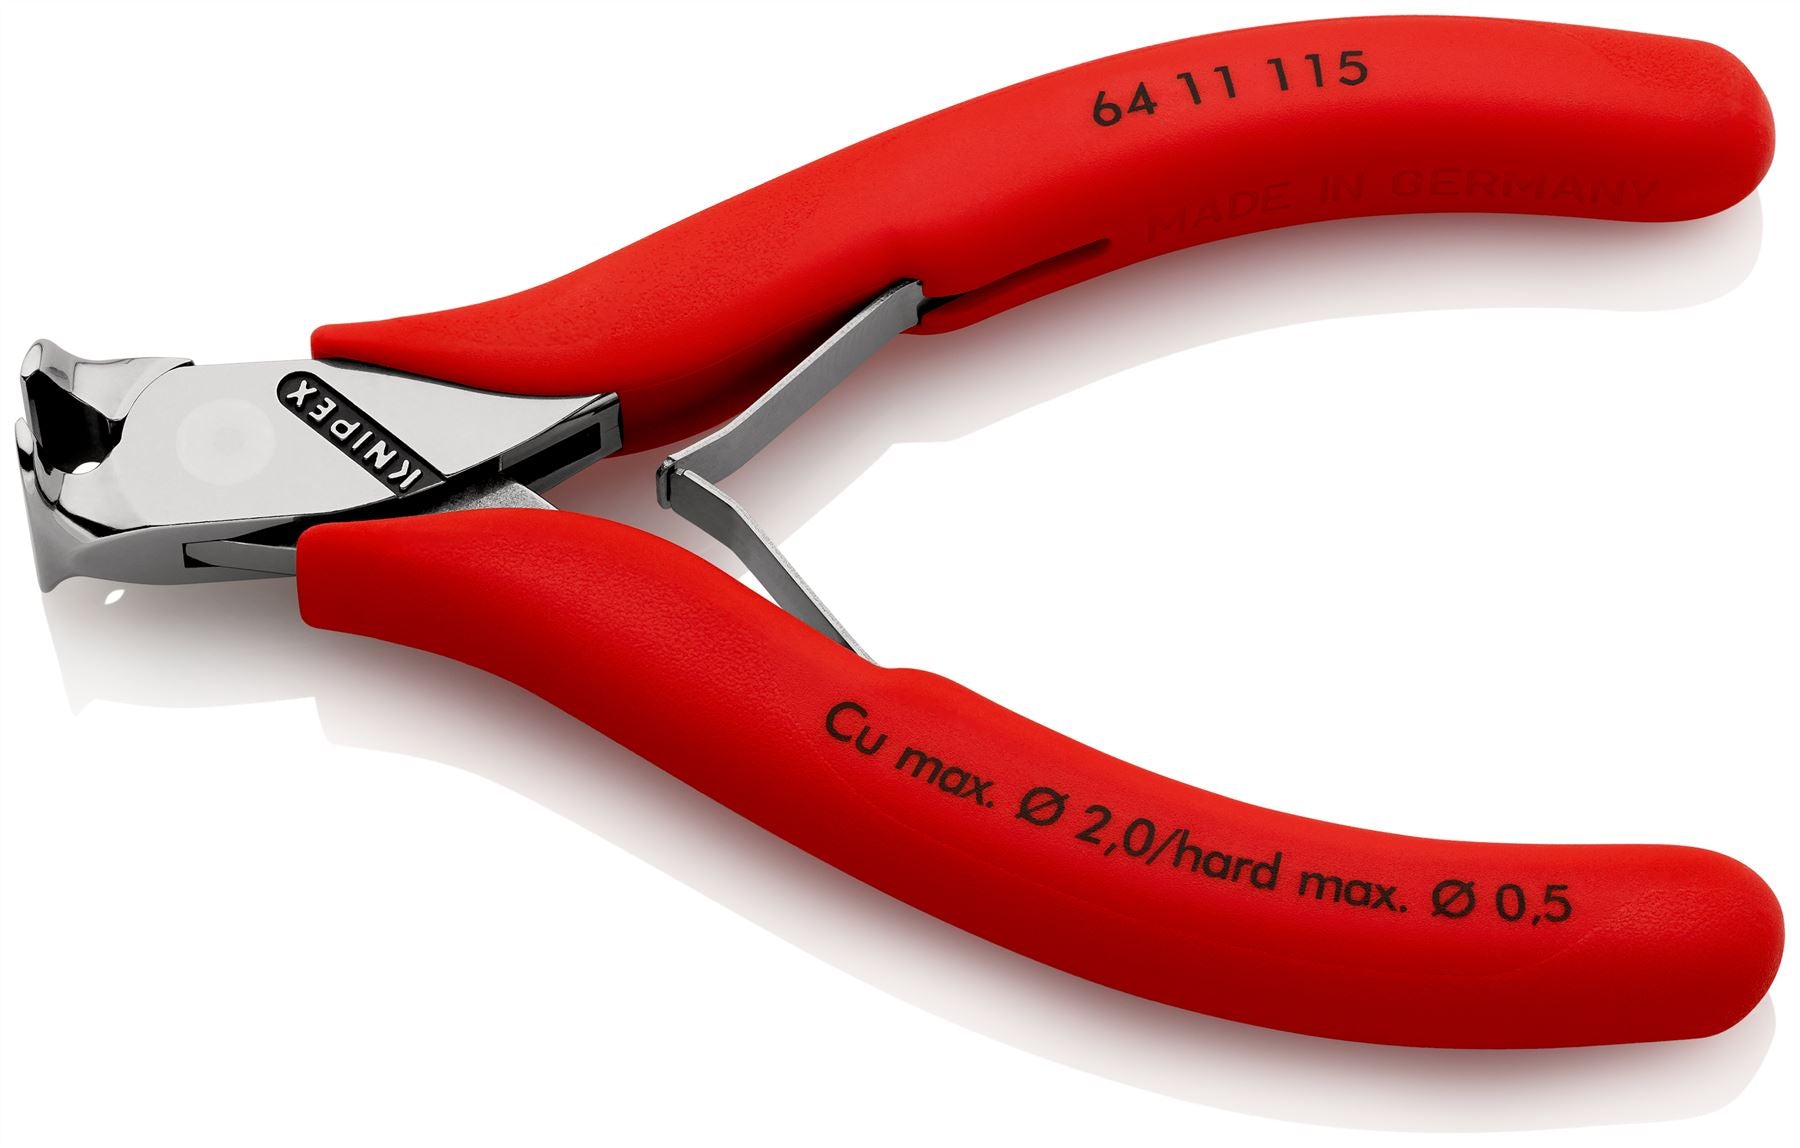 KNIPEX Precision Electronics End Cutting Nipper Pliers 115mm Plastic Coated 64 11 115